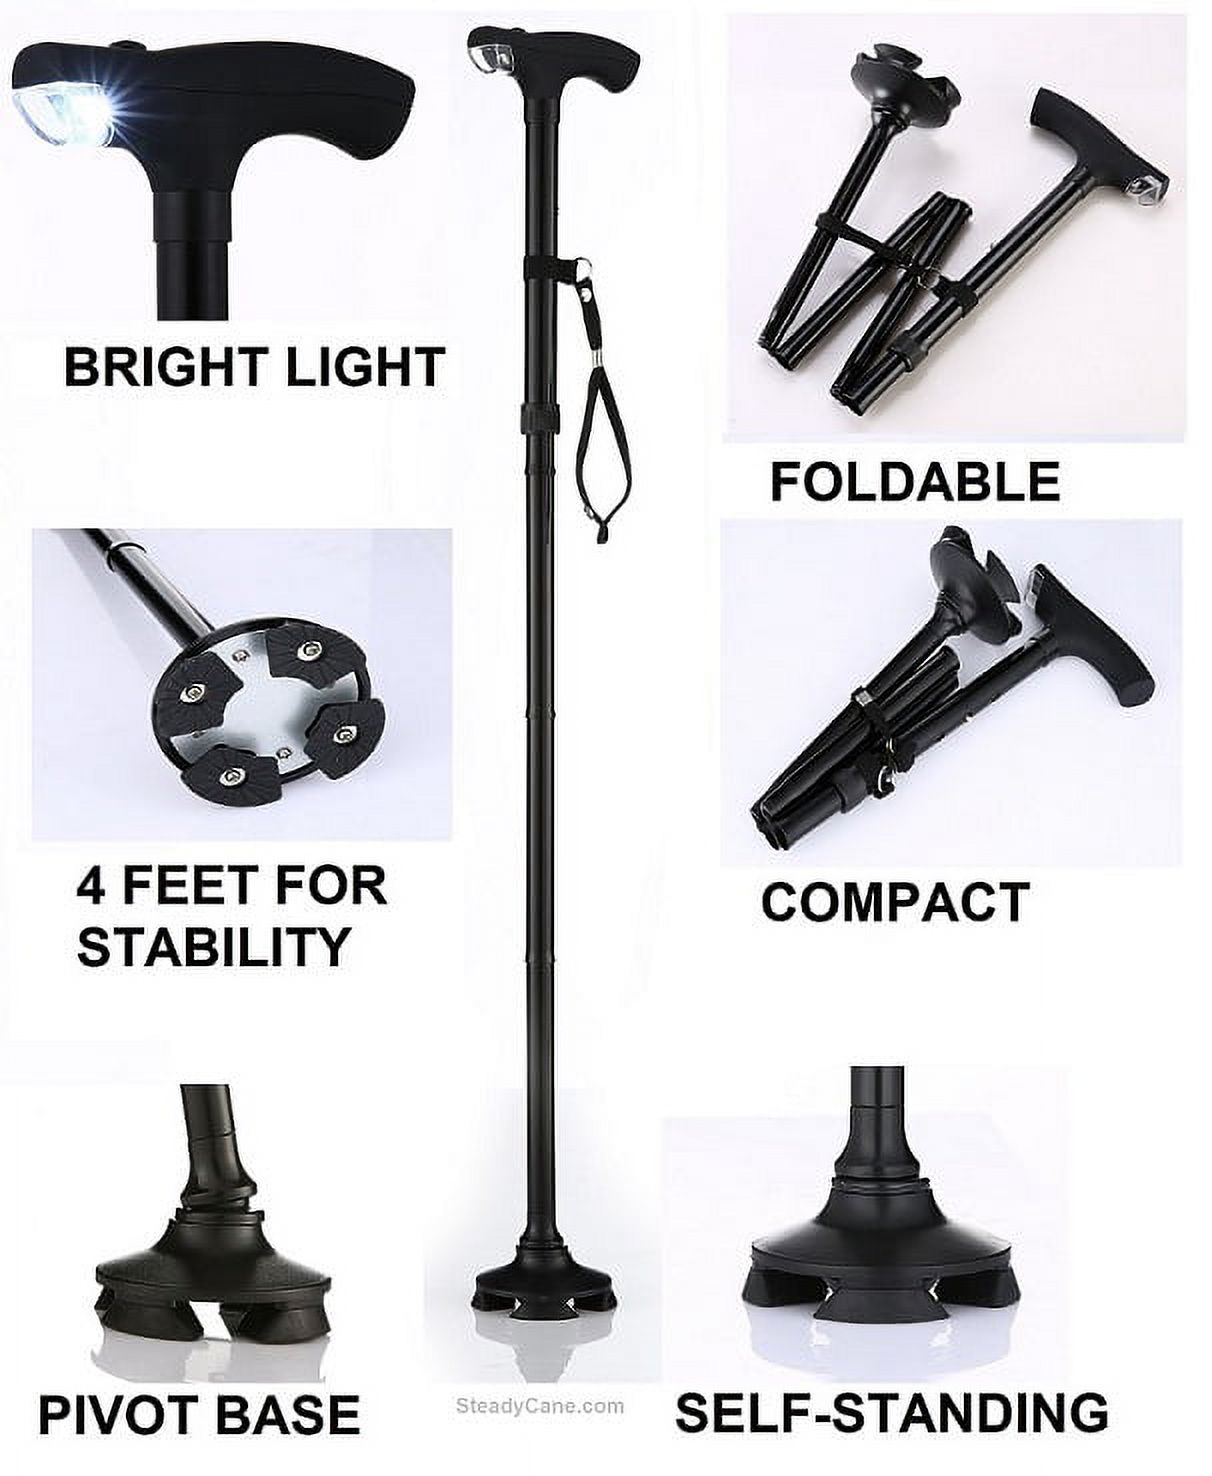 Folding Walking Cane Adjustable LED Light Self Standing Stable Pivot Base - Guaranteed - 4 Feet - Hurry Before They Are Gone - image 3 of 3